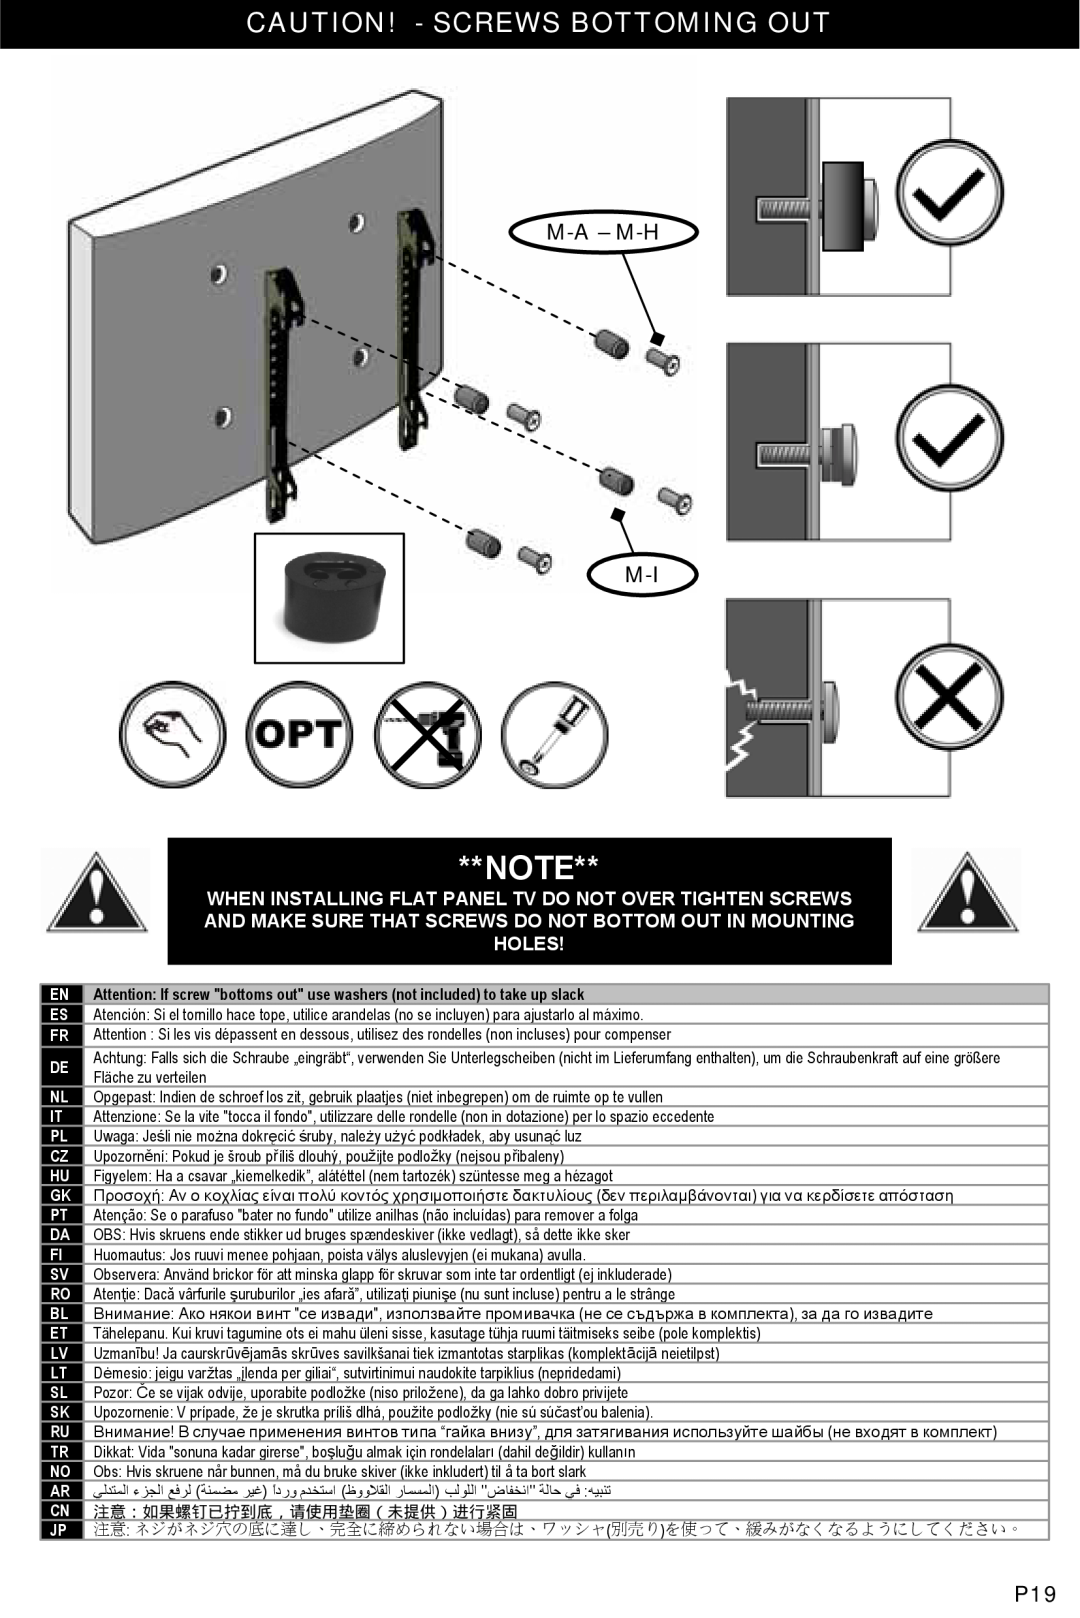 Omnimount OM10046, U3-F manual Caution! - Screws Bottoming Out, M-A - M-H M-I 